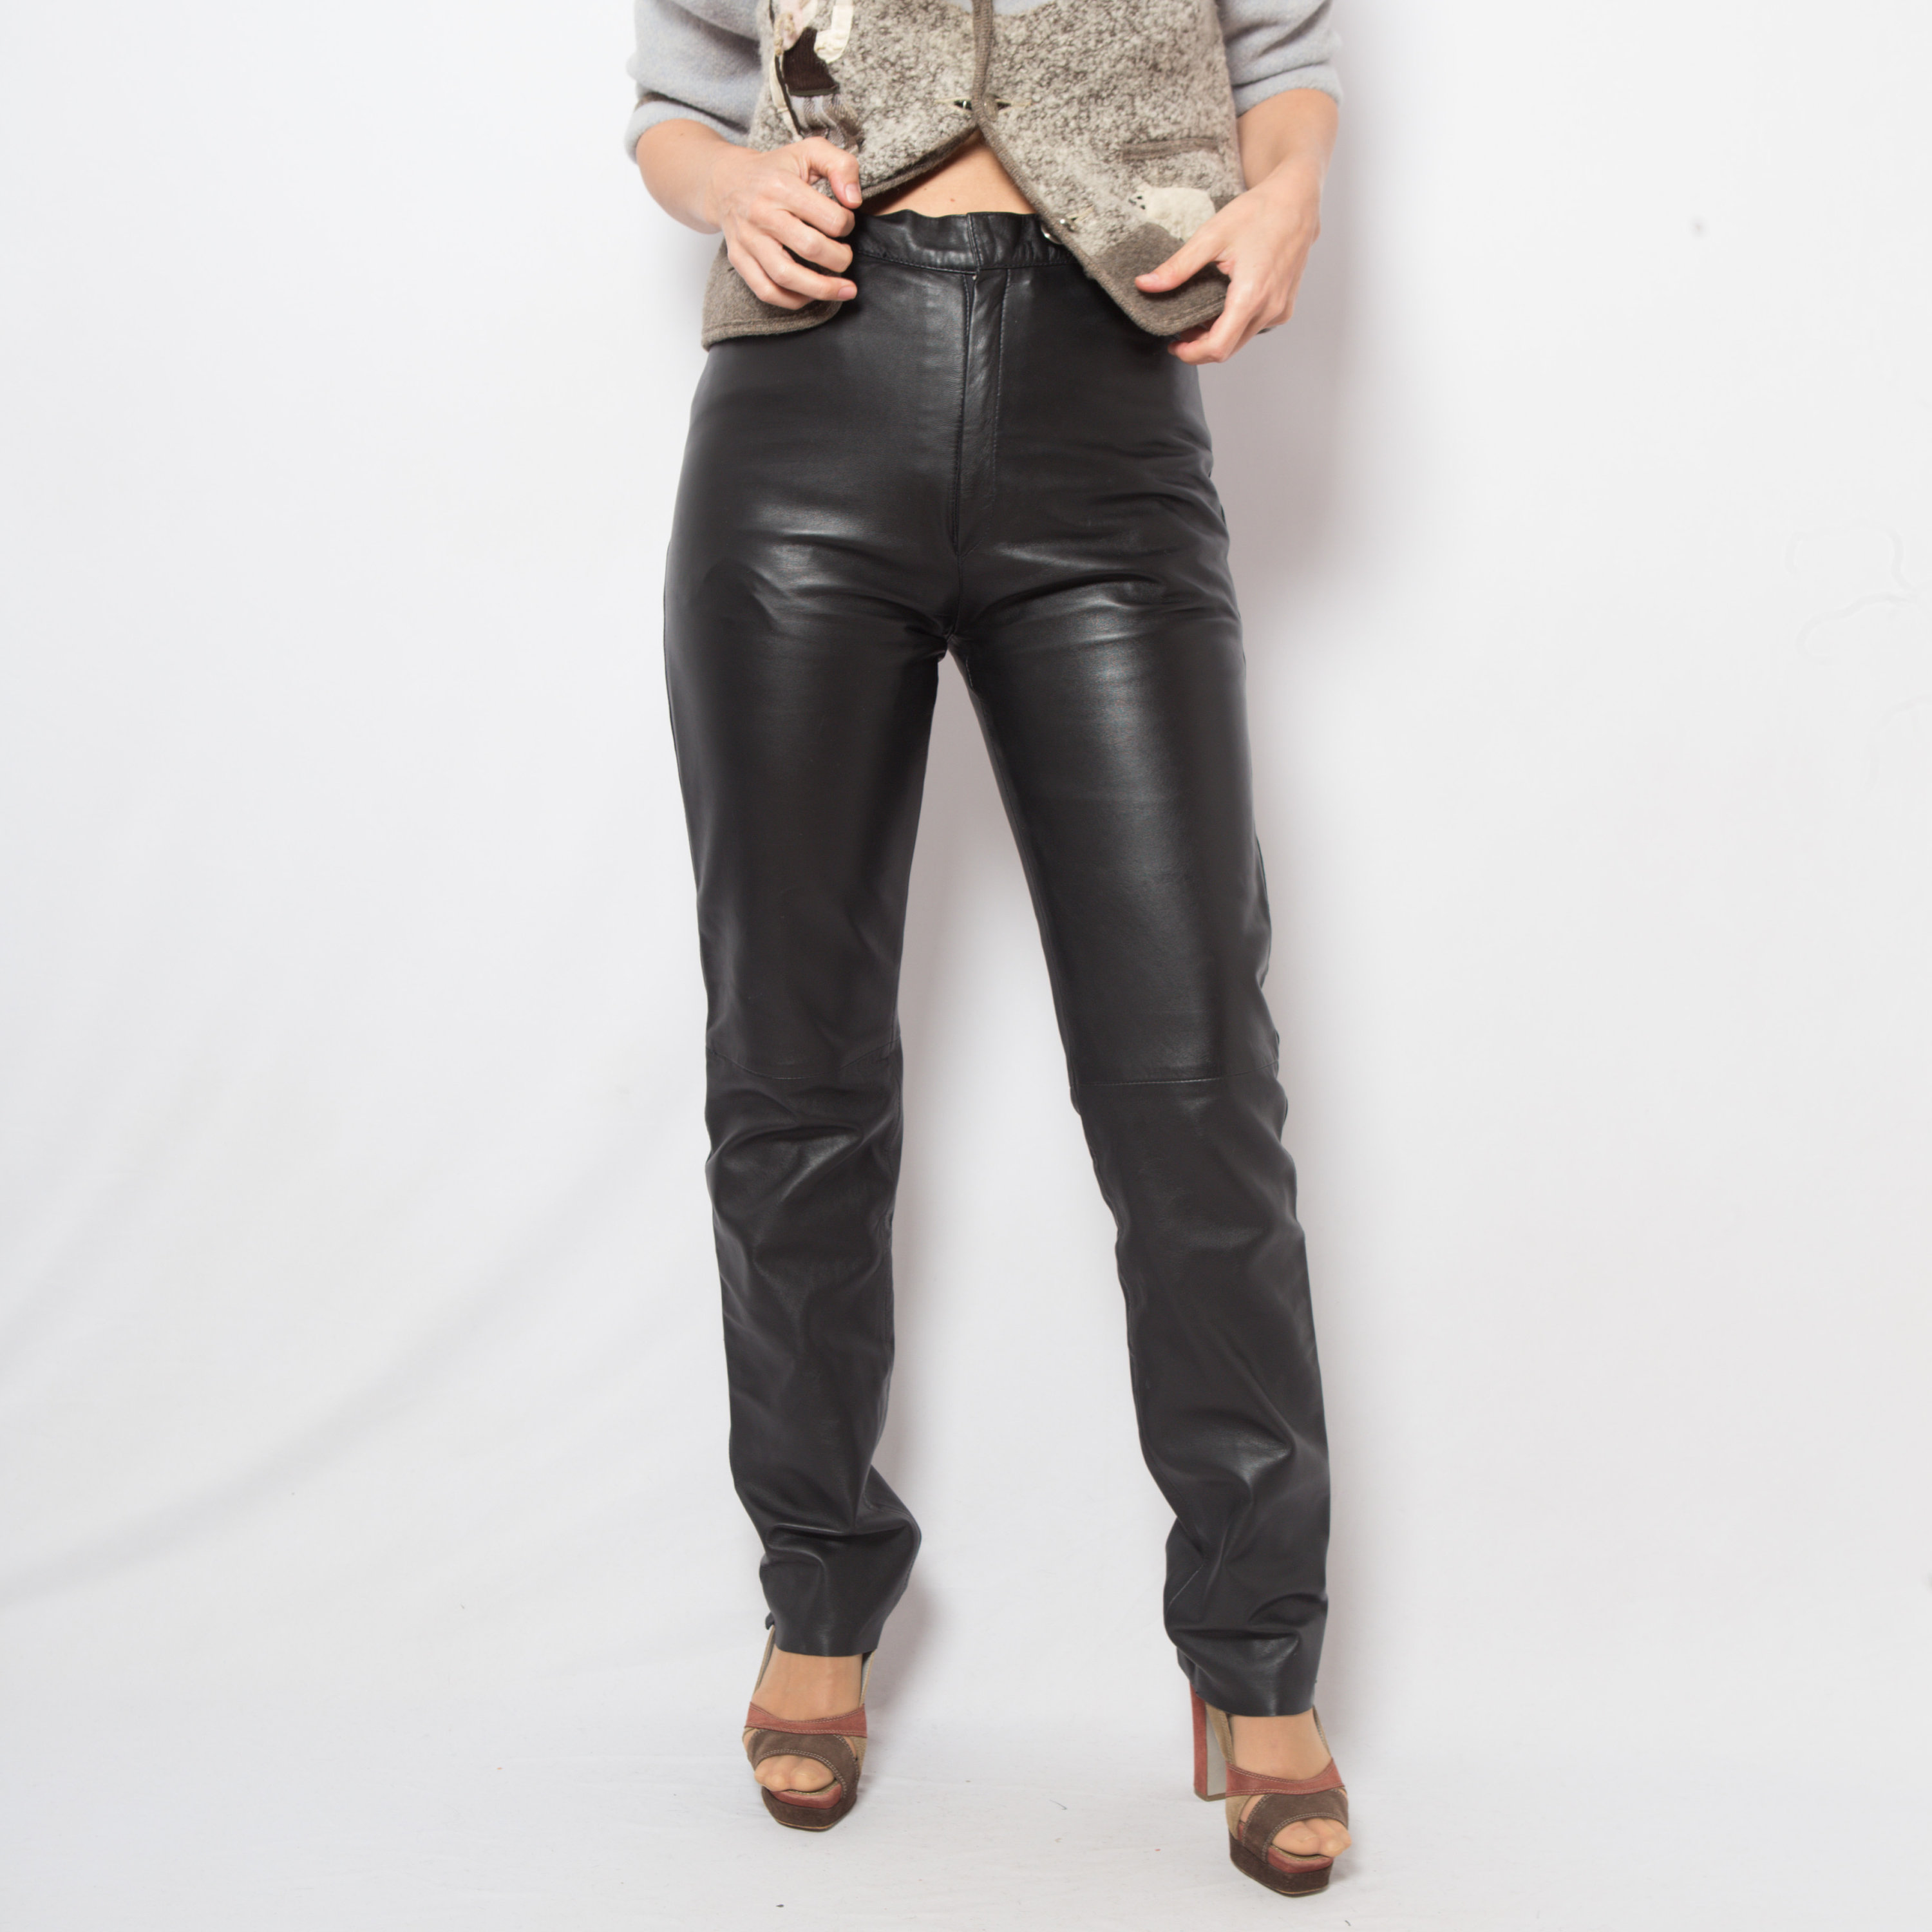 Stretch Faux Leather Pants Jeans Motorcycle Women Pencil Trousers